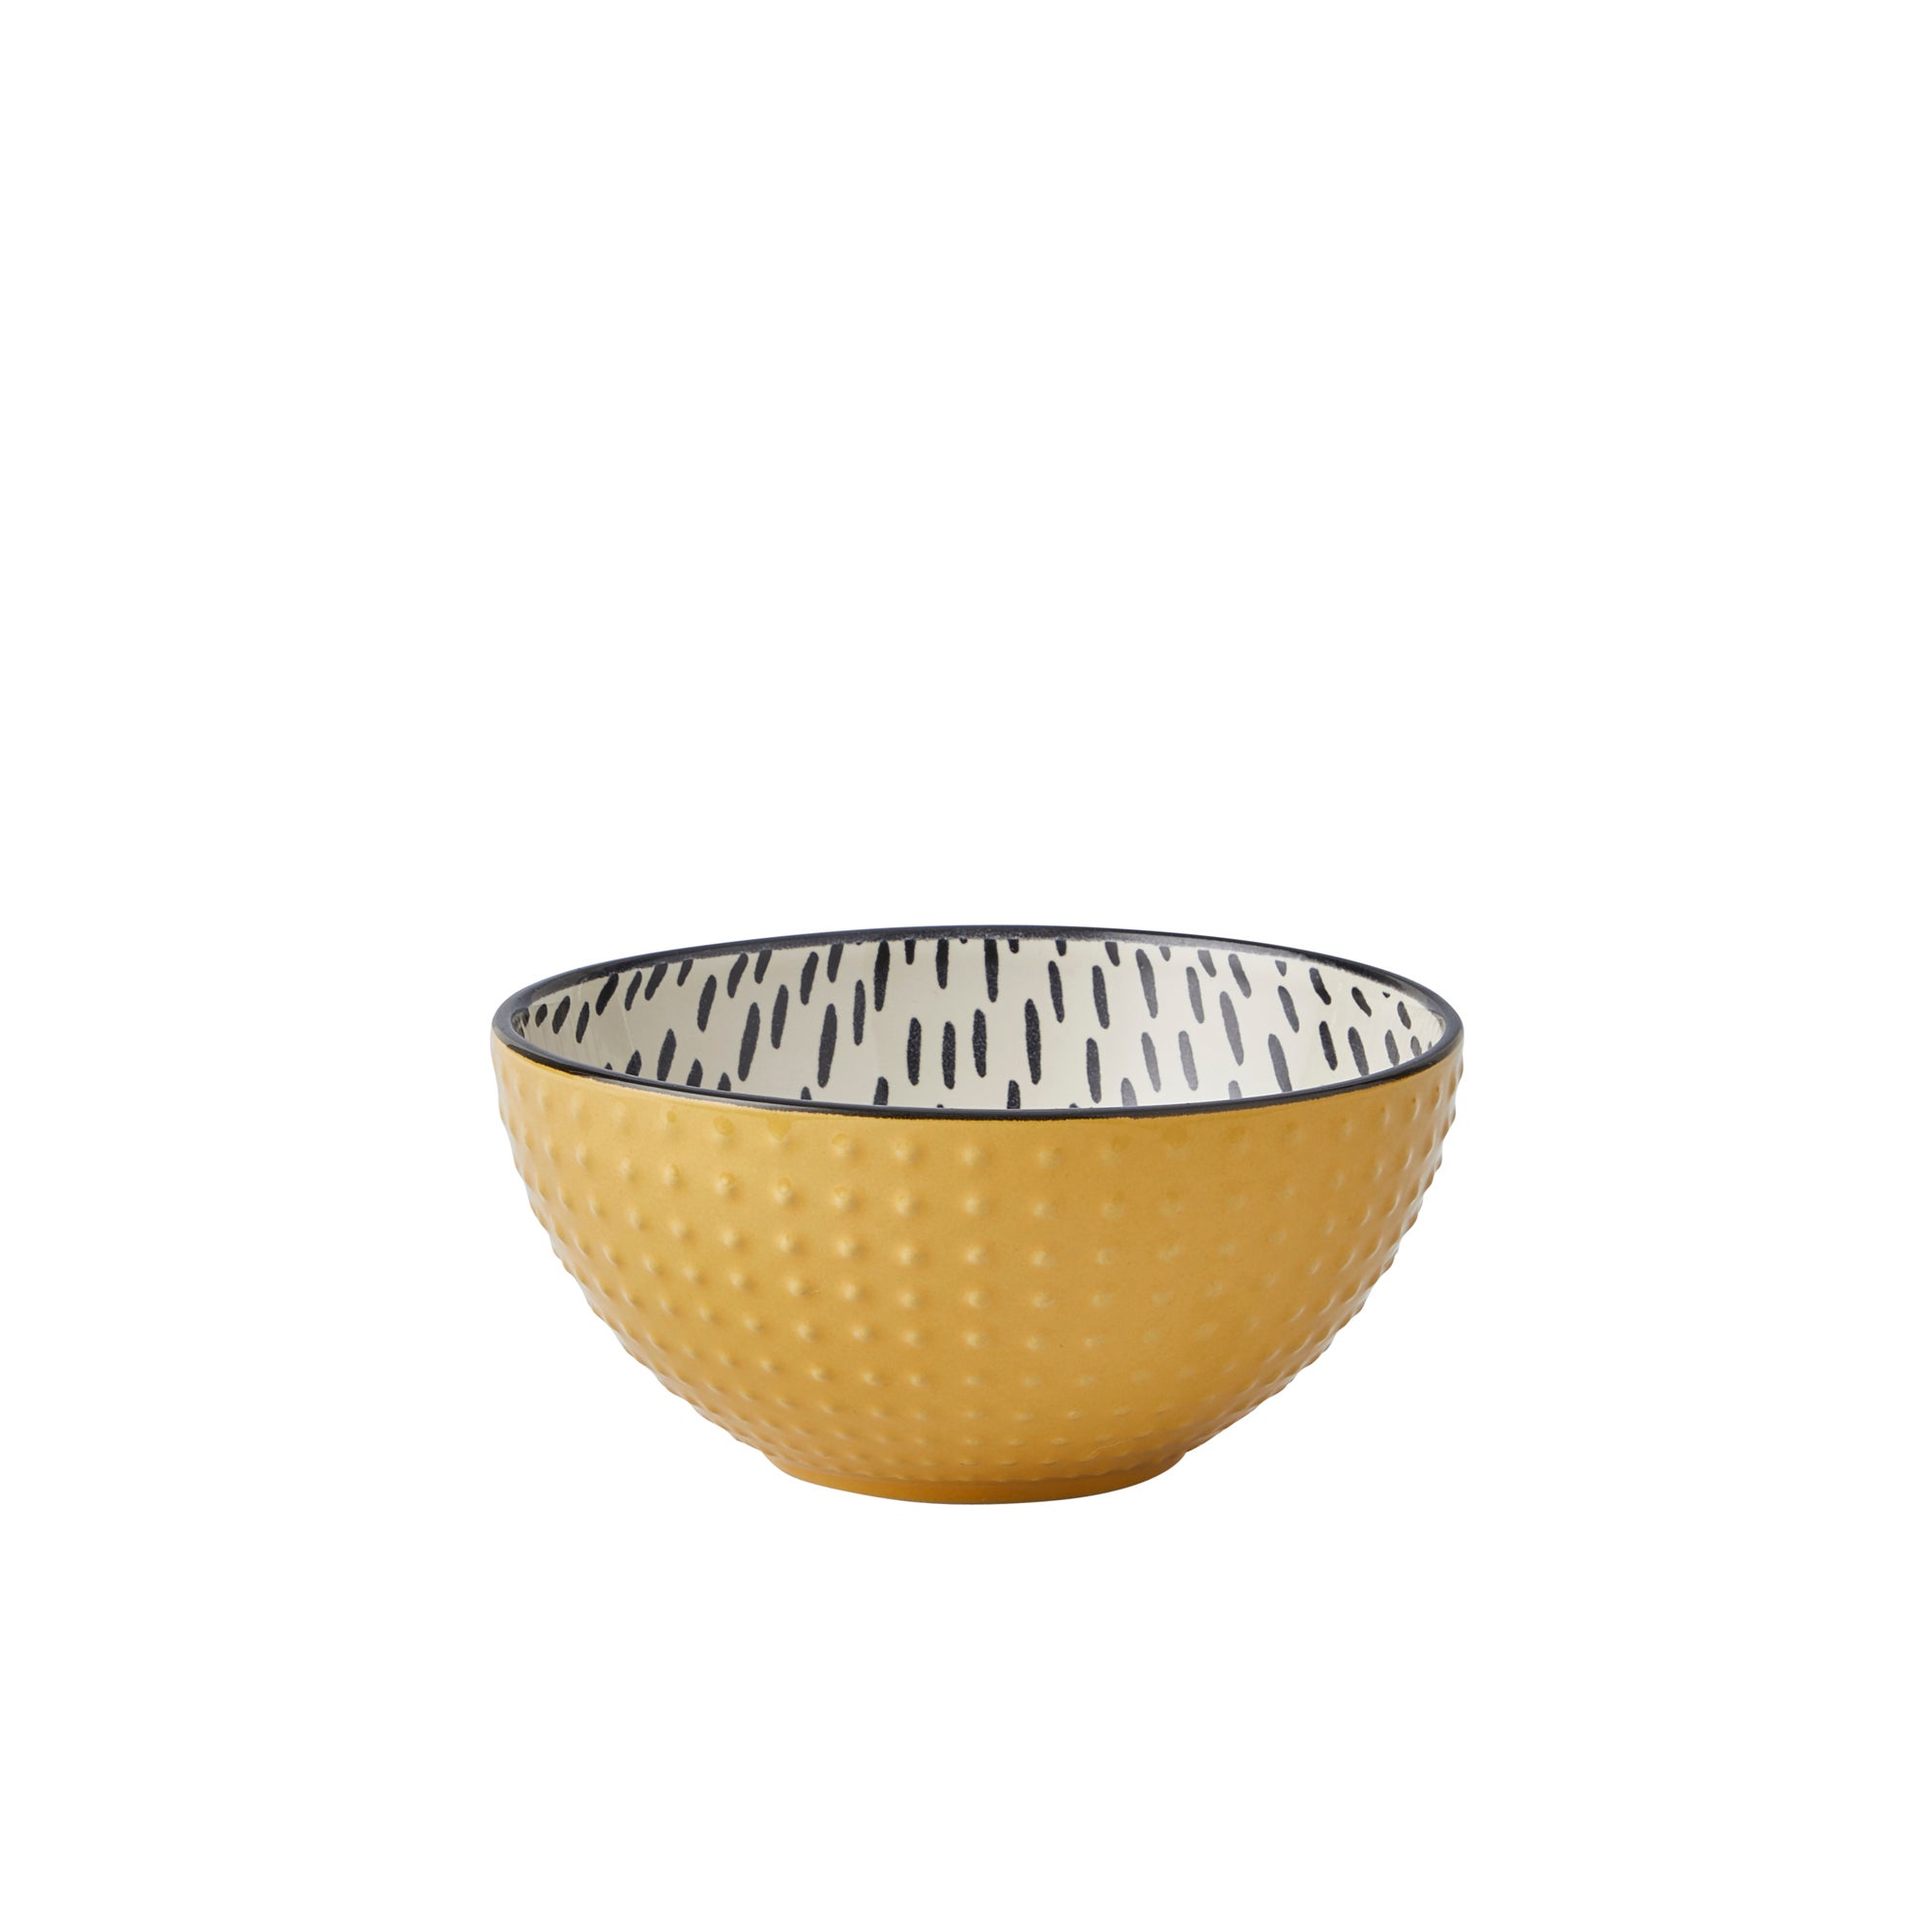 Global Ochre Stoneware Cereal Bowl Yellow And White